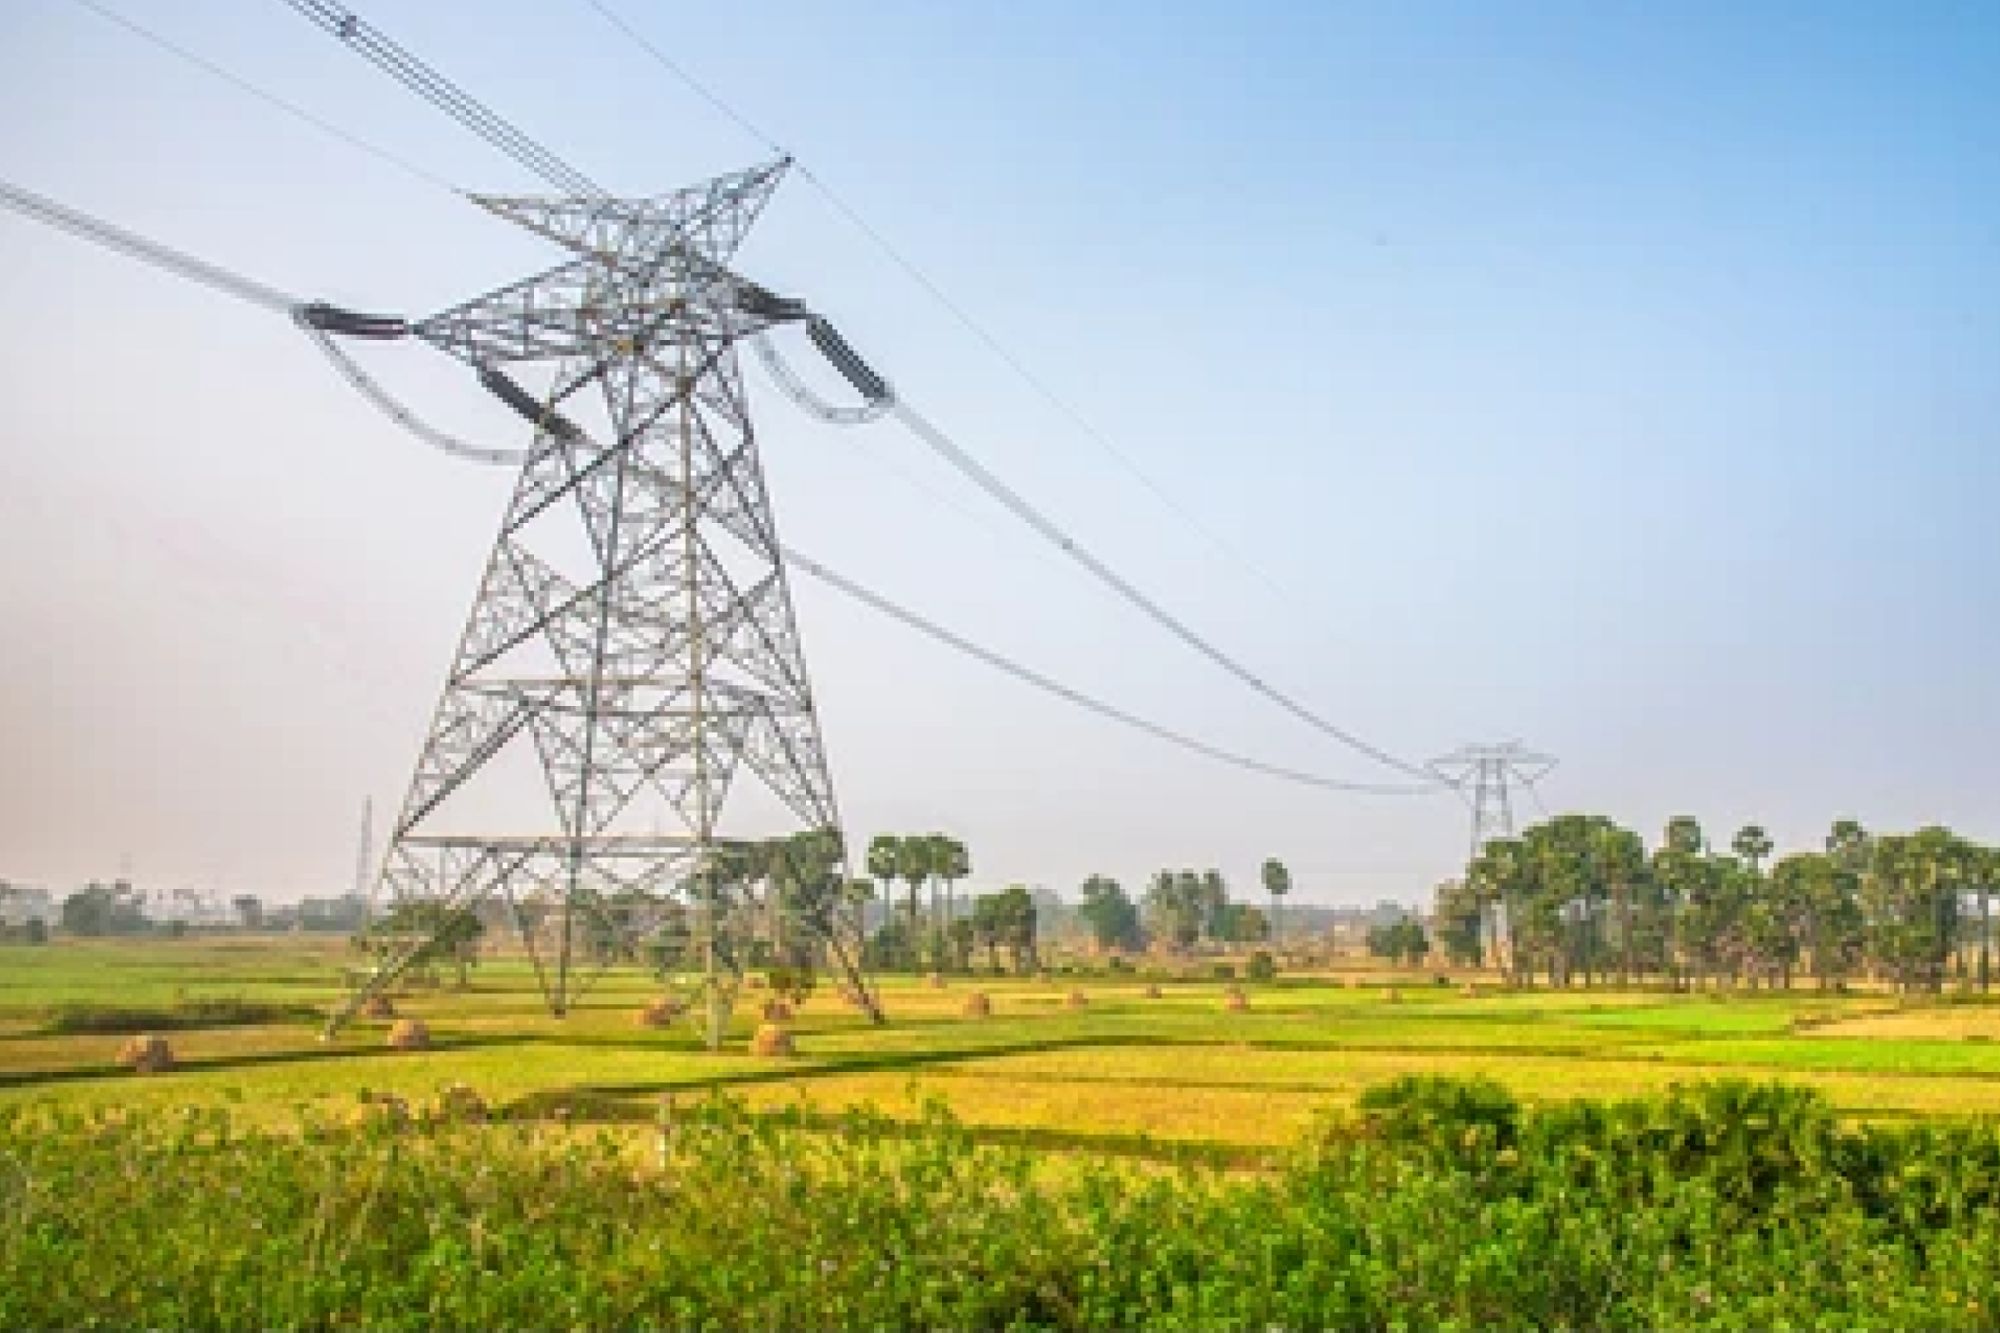 With an investment of 1.85 lakh crores India achieves 100 percent village electrification